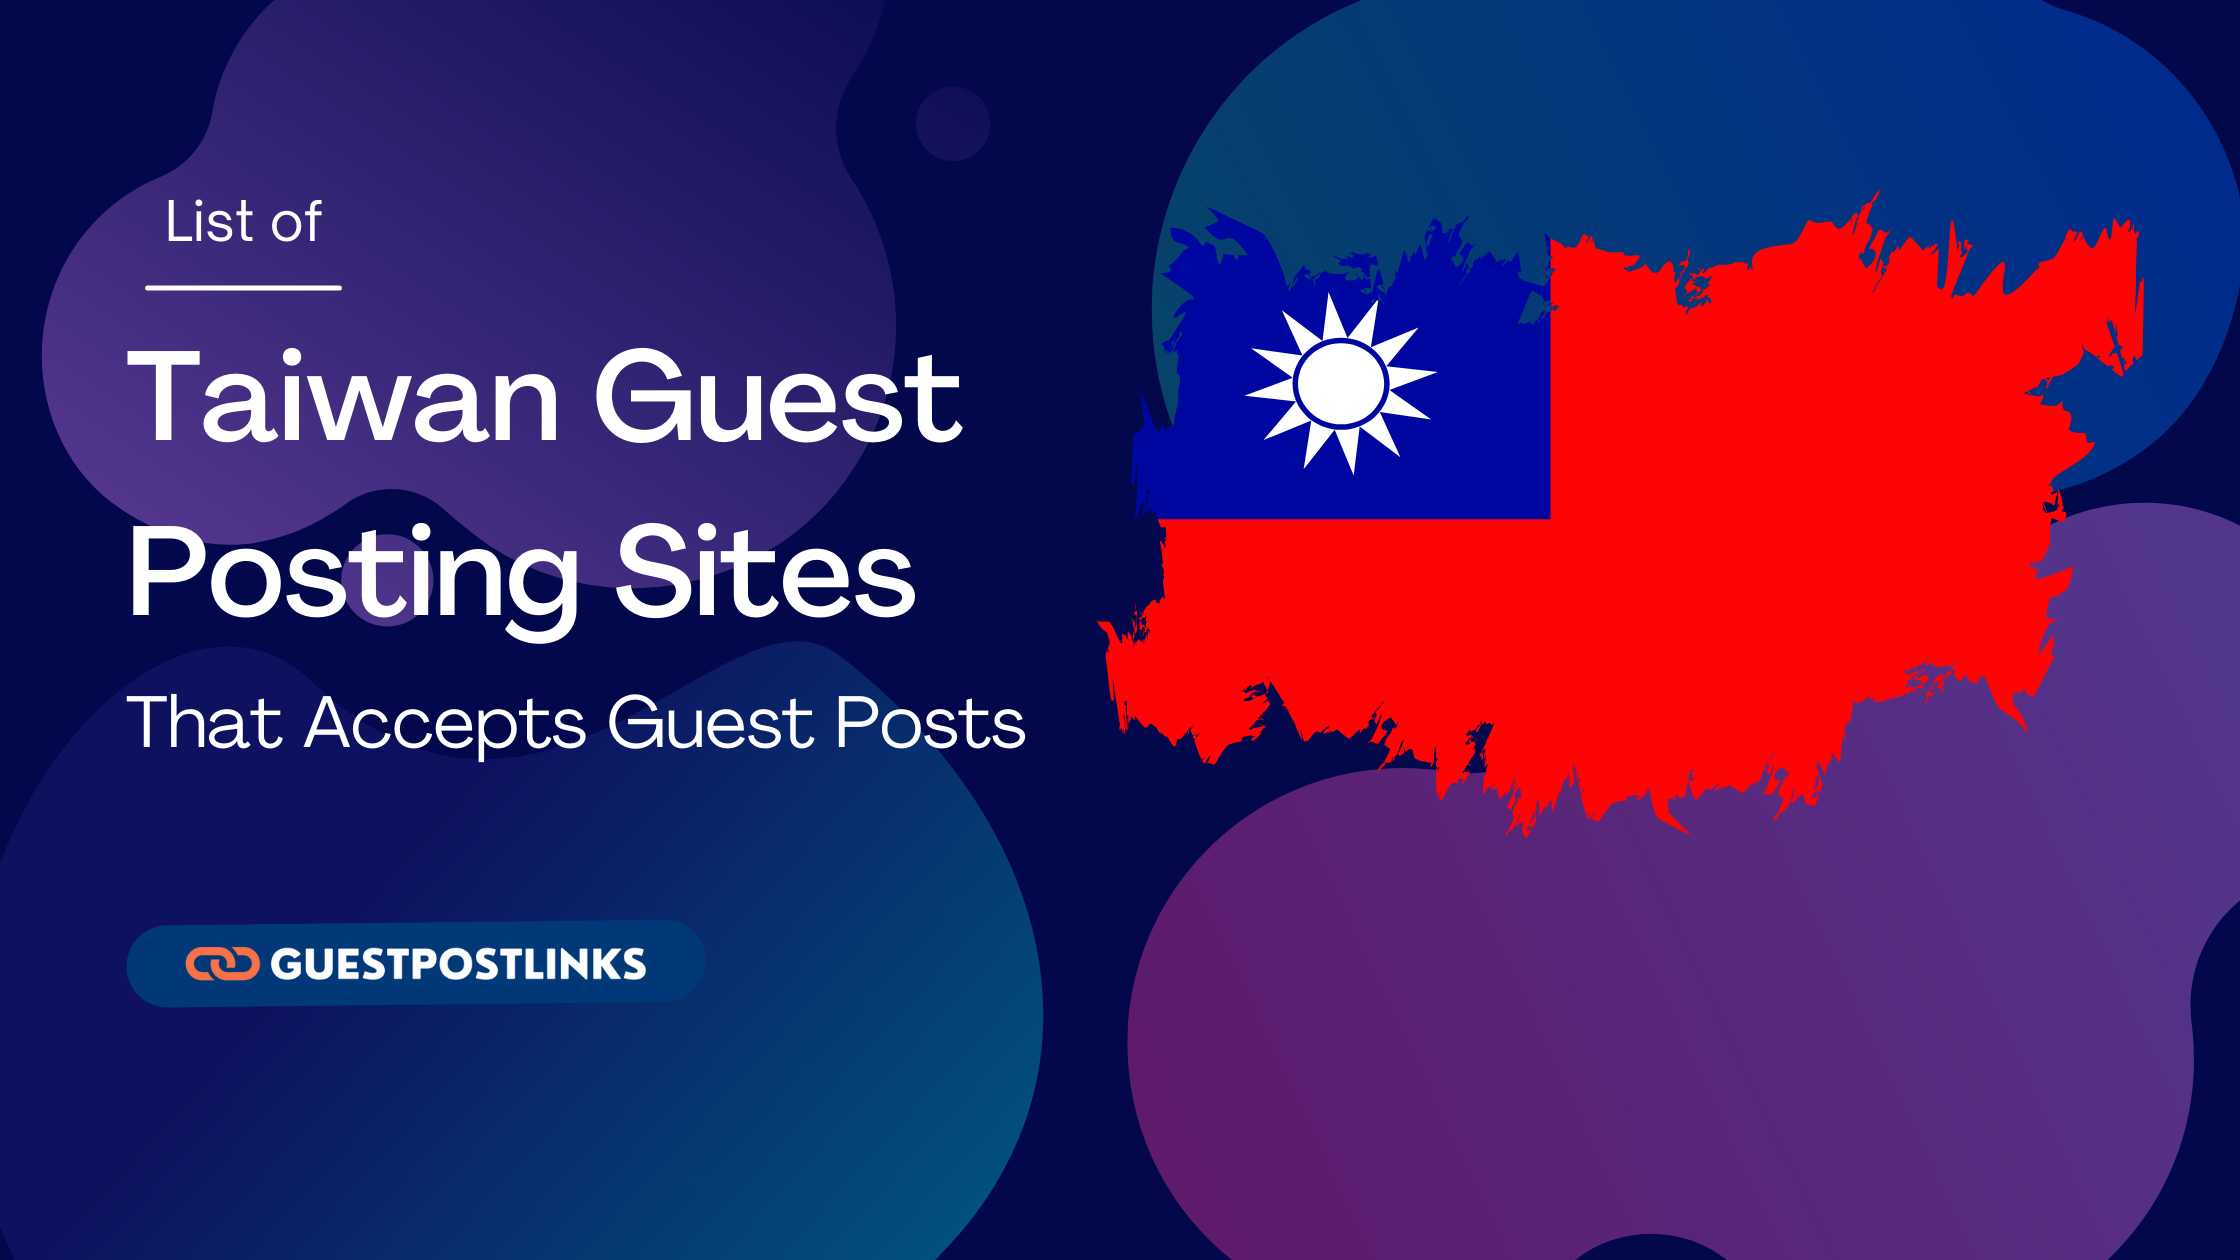 Taiwan Guest Posting Sites List